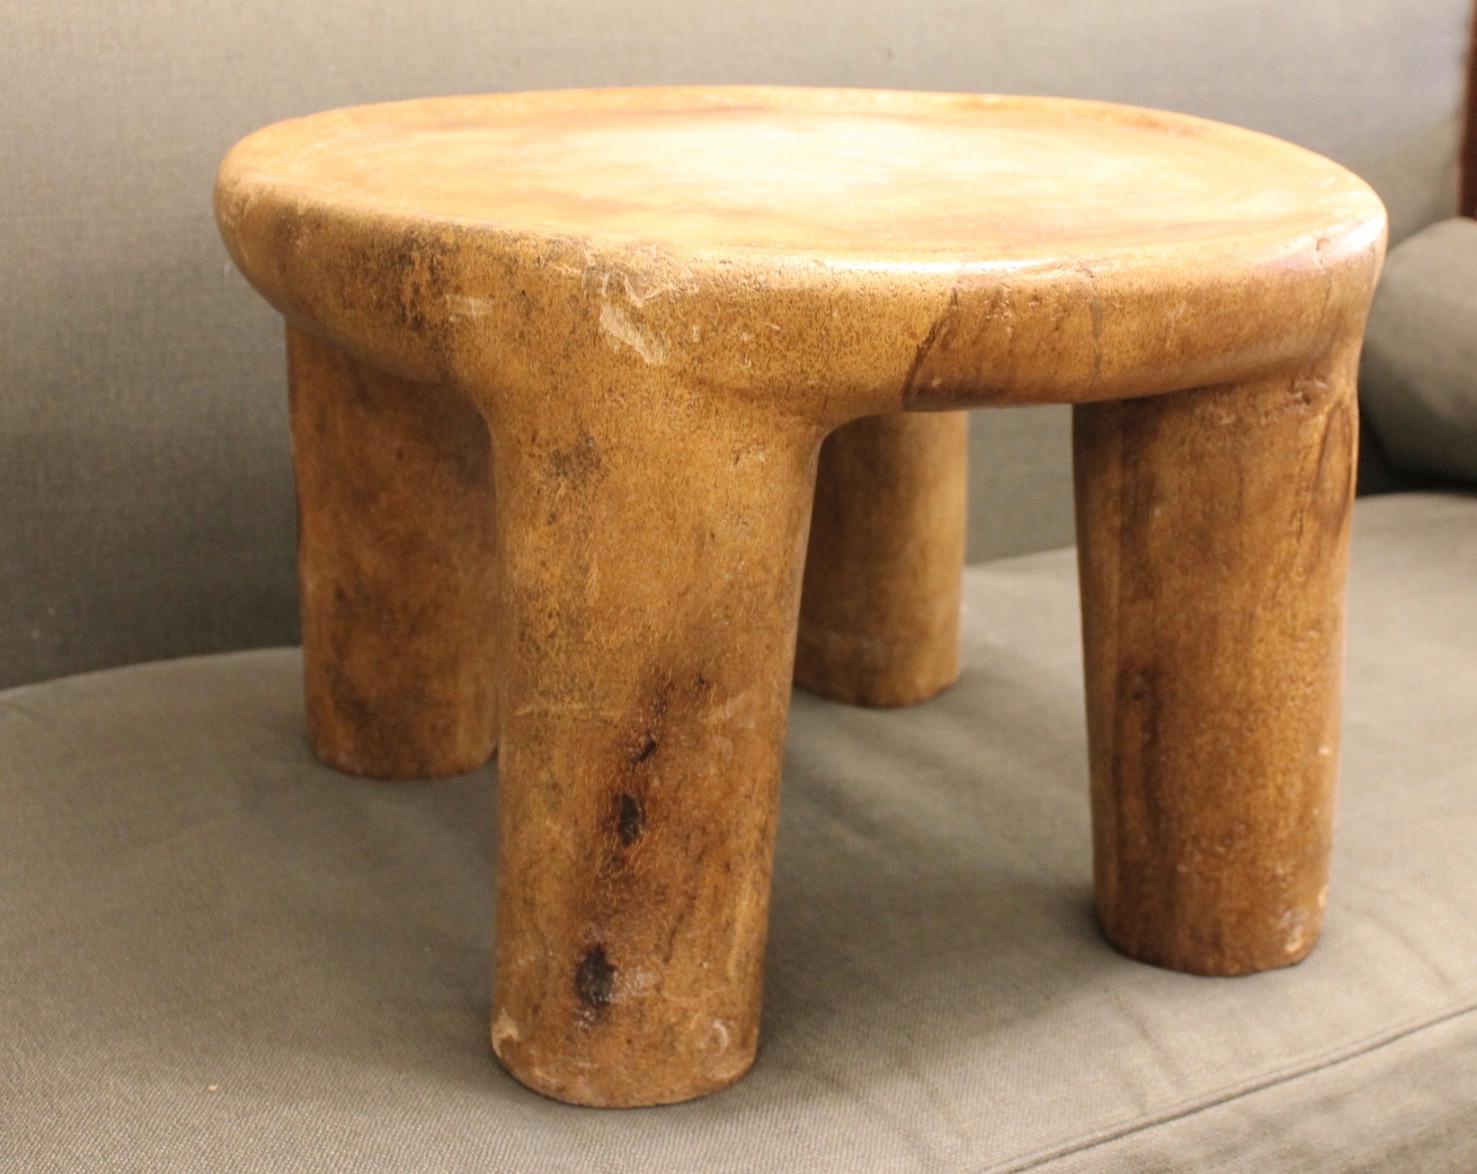 Realization of a table from a palm tree trunk. The legs of the table are carved in the mass.
To obtain the hardness of the wood, it is soaked in salt water and then dried in the sun for several months.
Work done in North Africa,